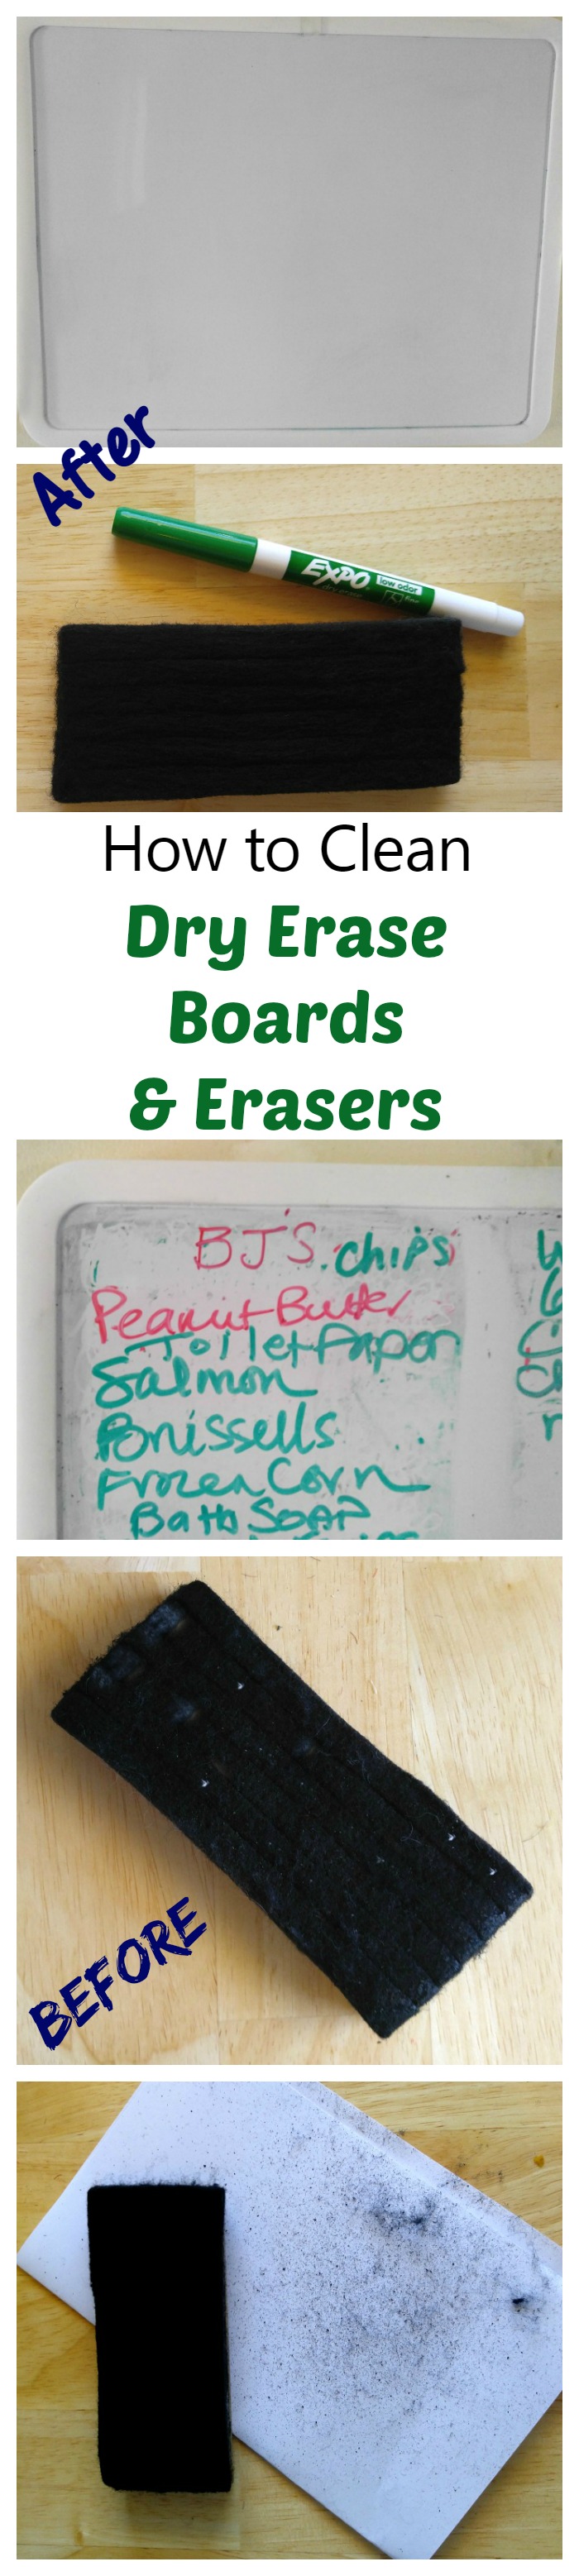 How to clean a dry erase board without ruining it Cleaning A Dry Erase Board And Eraser